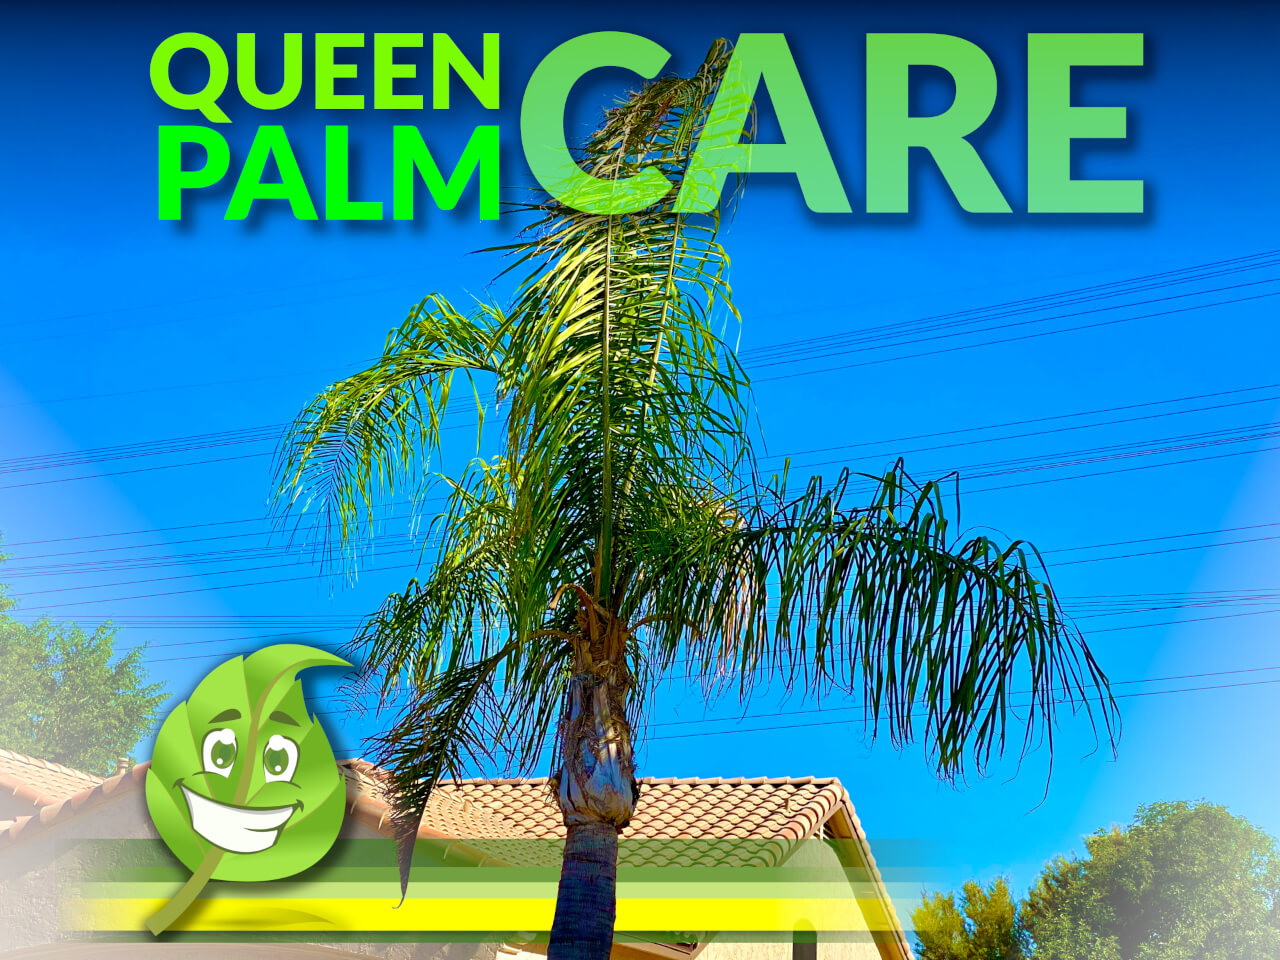 Queen Palm Care